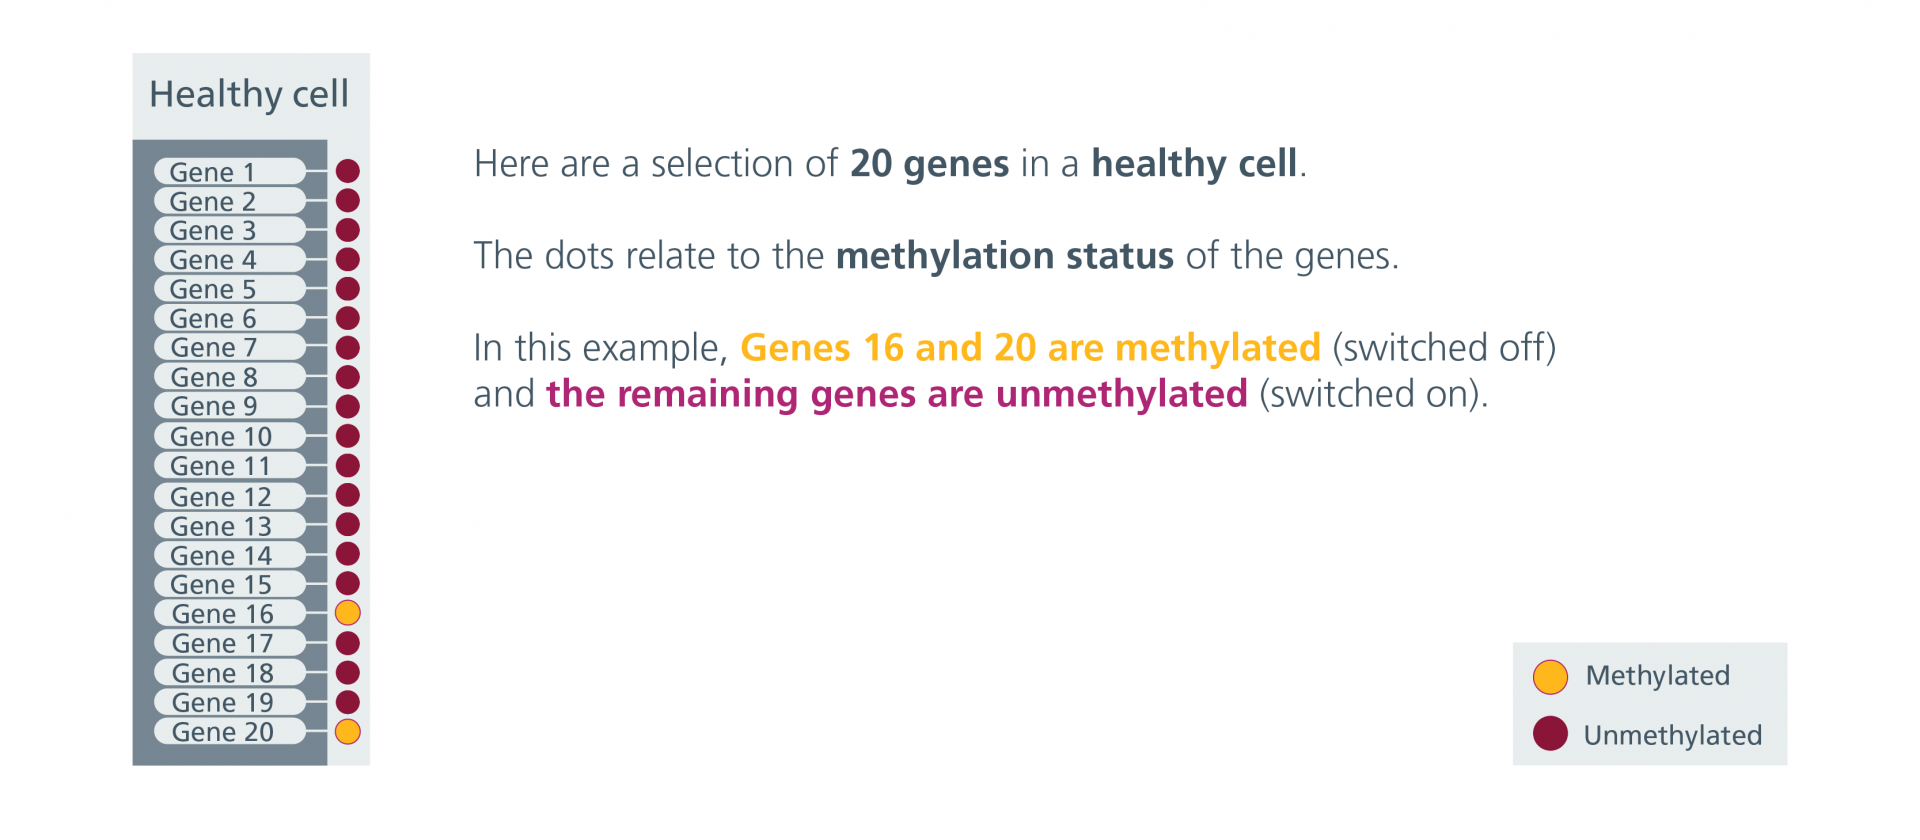 A selection of 20 genes in a healthy cell. Genes 16 and 20 are methylated (switched off) and the remaining genes are unmethylated (switched on).